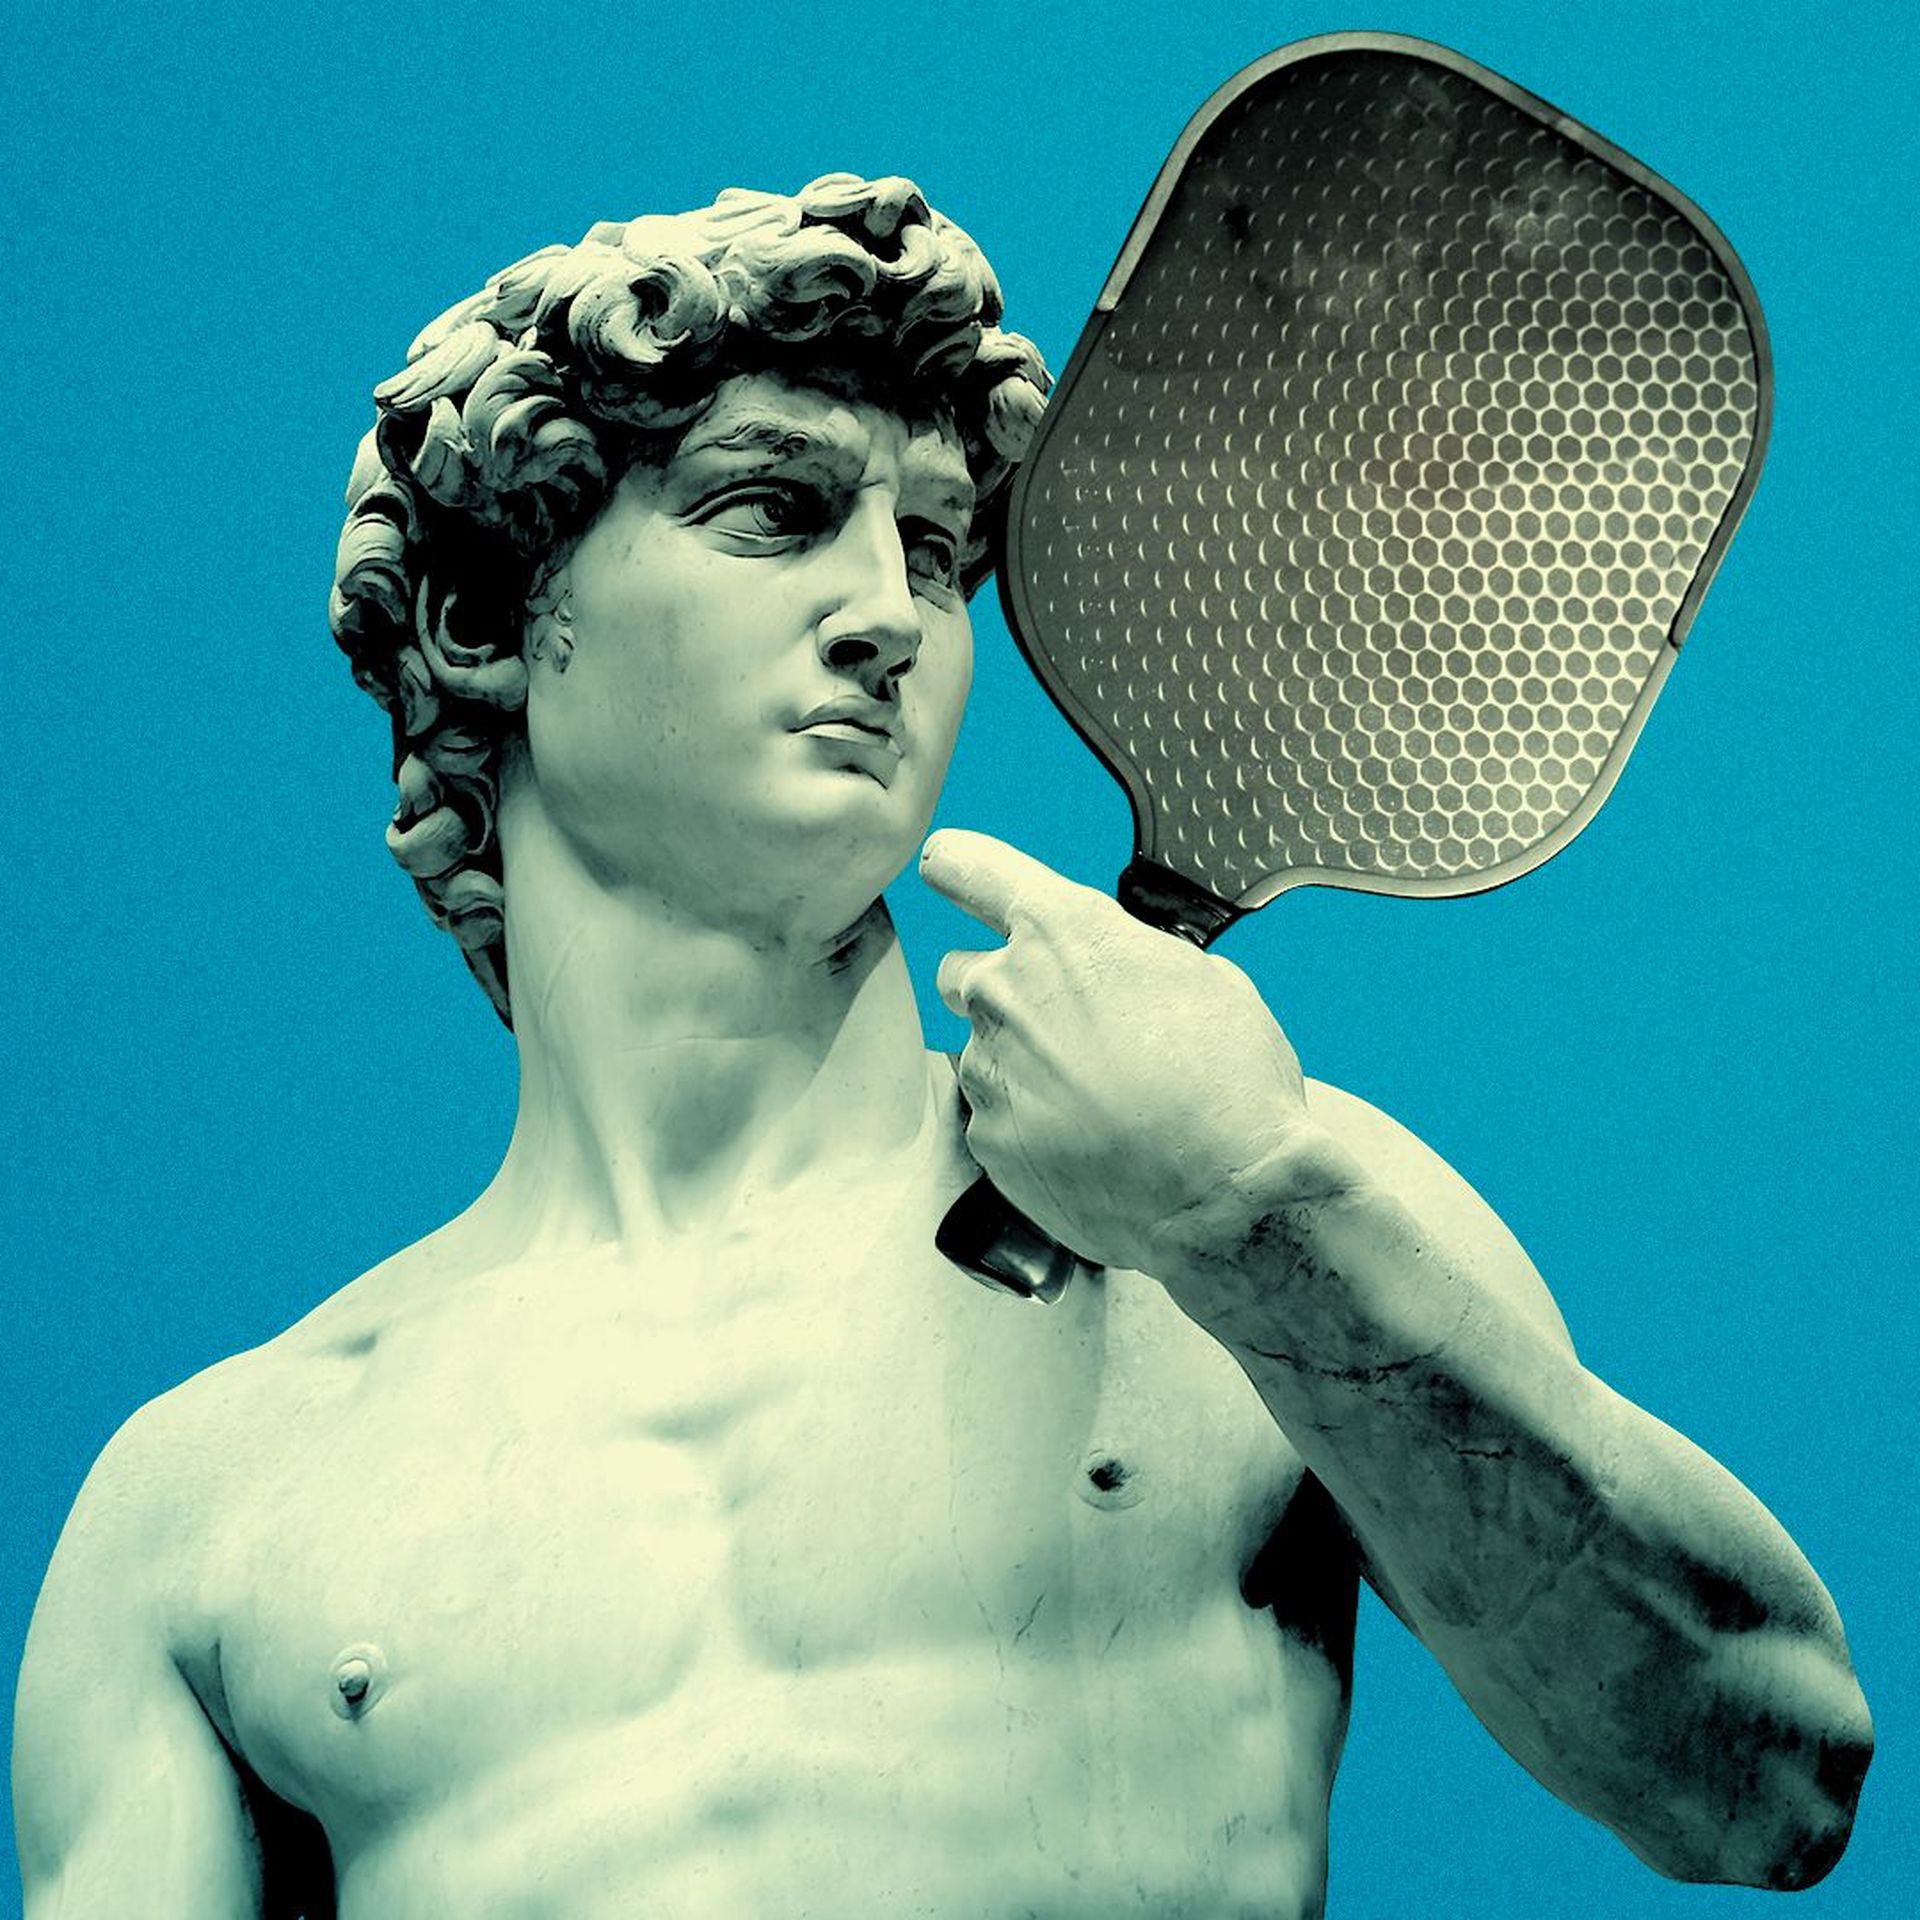 Photo illustration of Michelangelo's Statue of David holding a pickleball paddle.